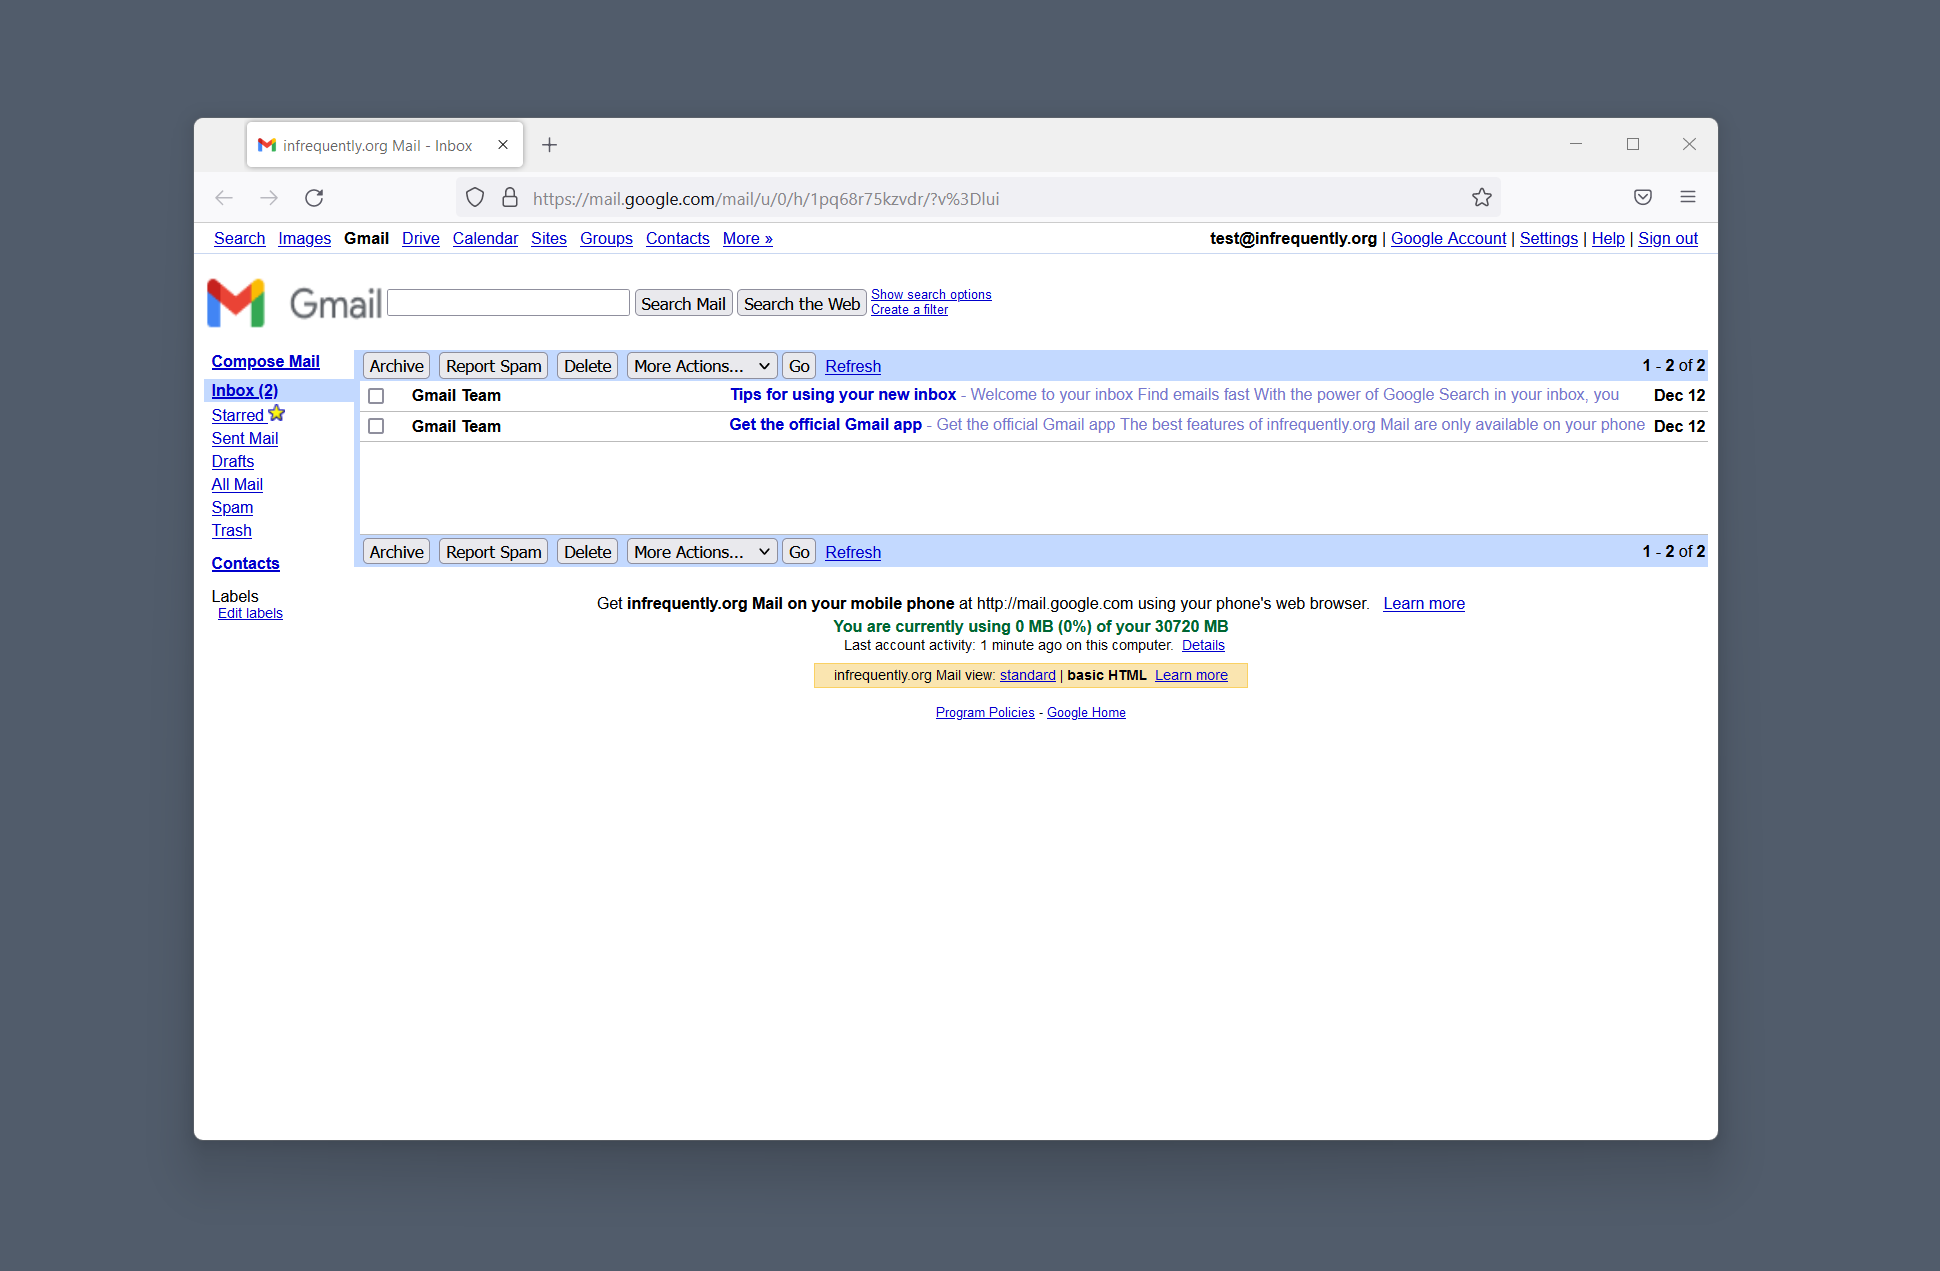 The same inbox in Gmail's 'simple HTML' mode